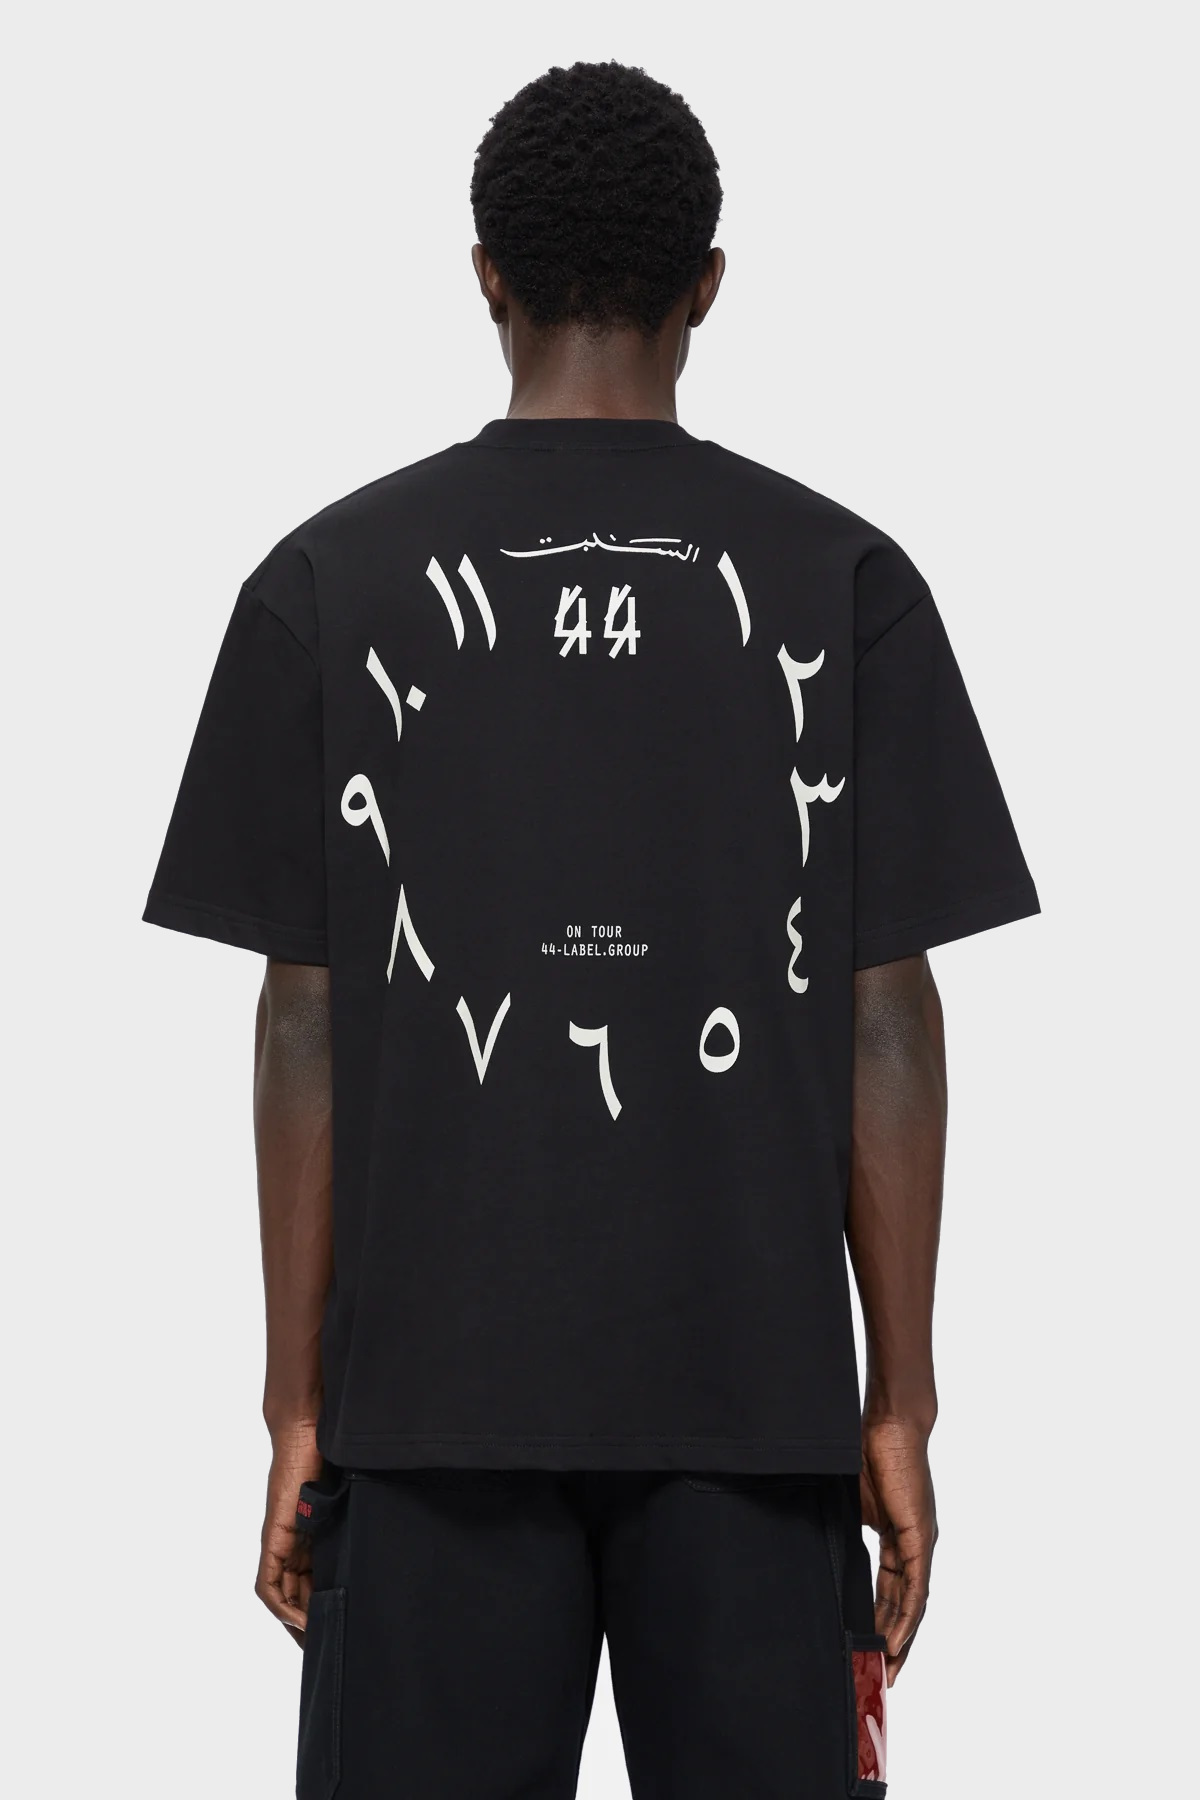 44 LABEL GROUP Arabic Dial Tee in Black S